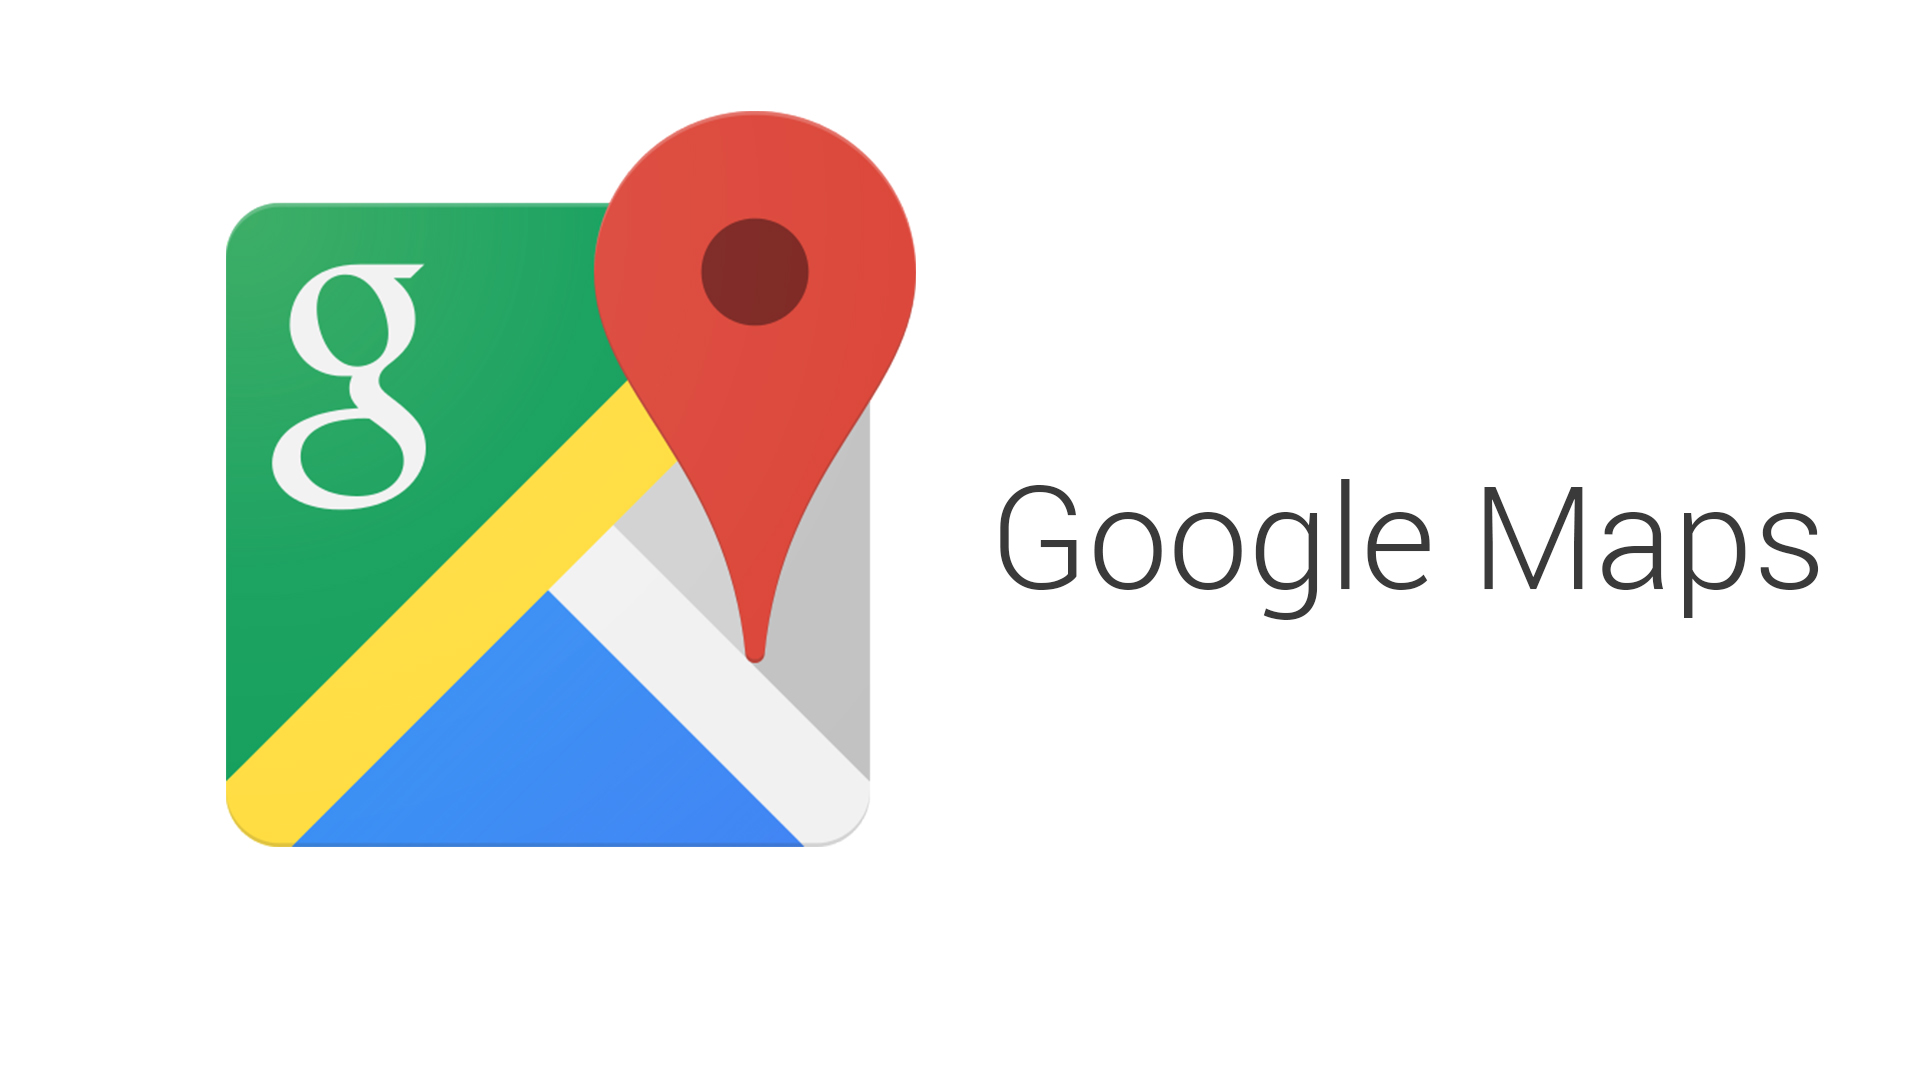 Google Maps App for iOS has been updated with these features